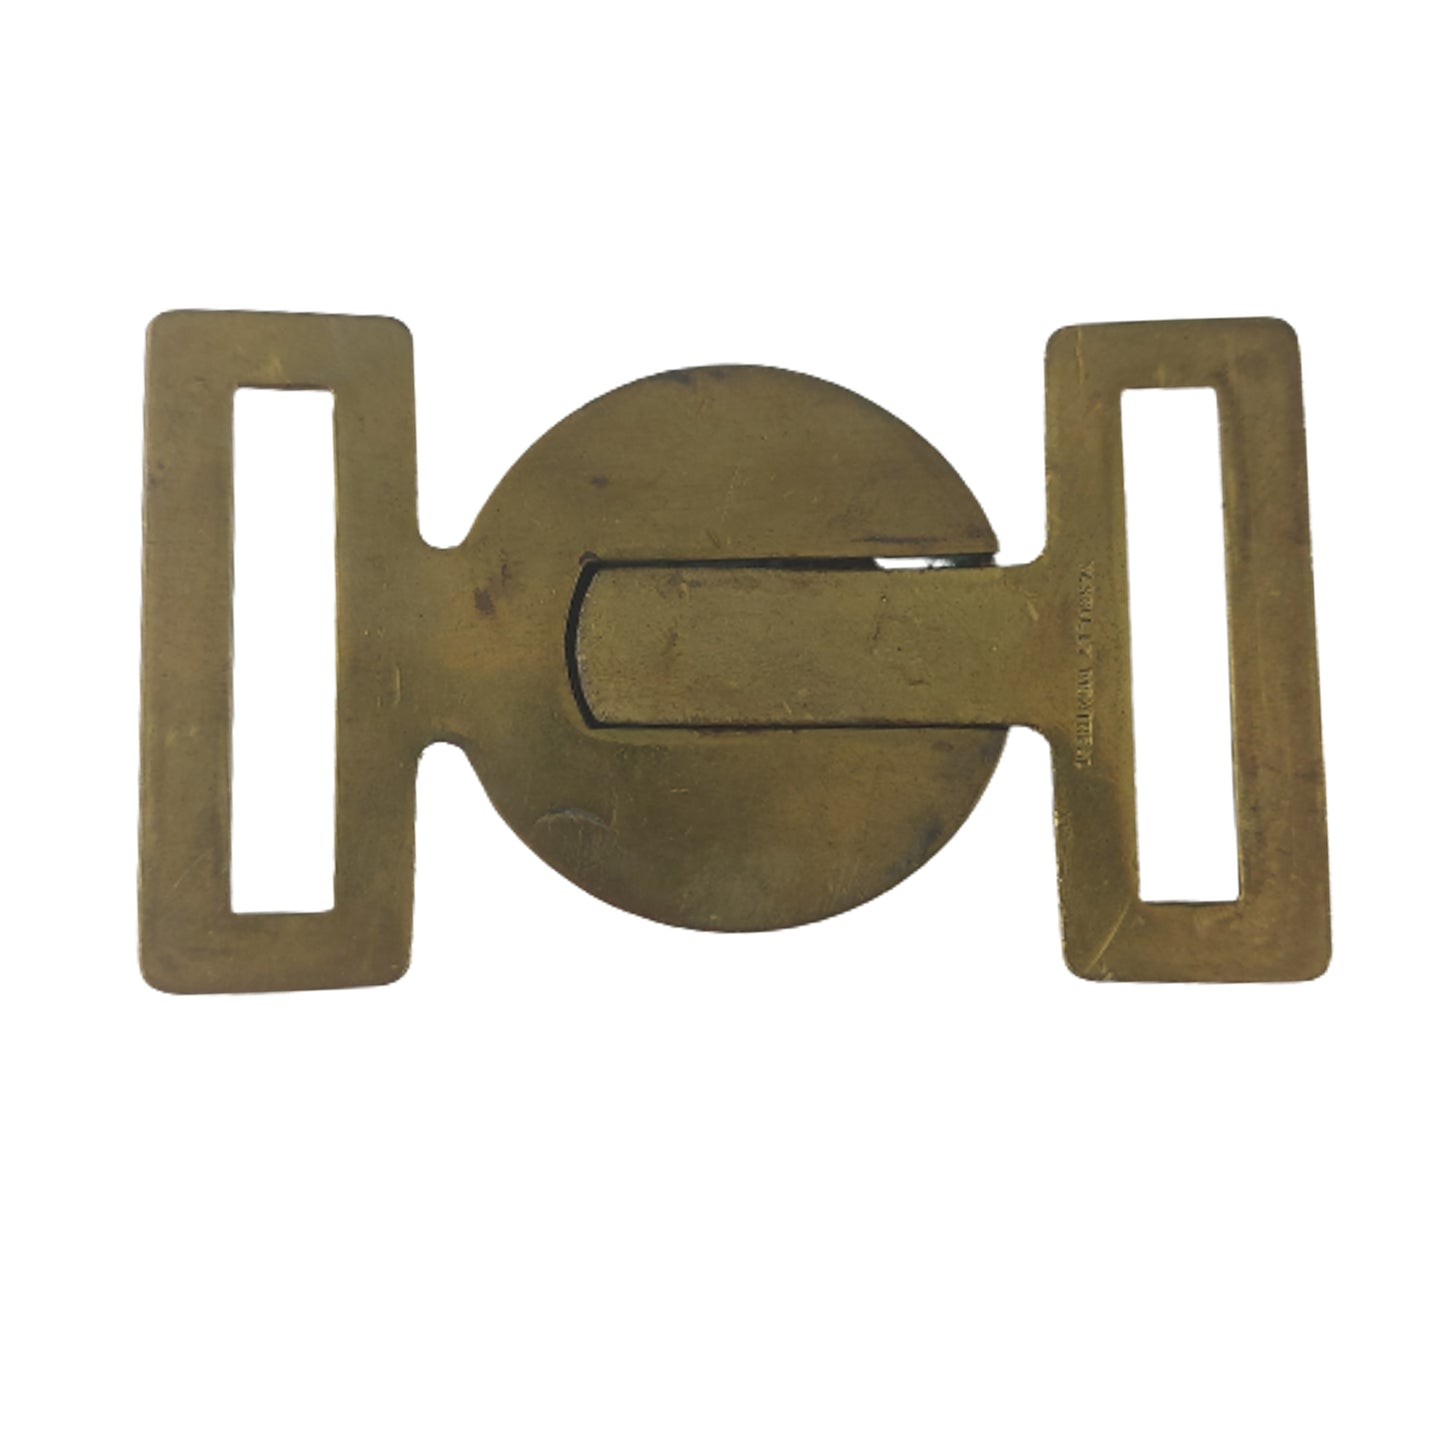 Canadian PPCLI Two piece Brass Buckle -Scully Montreal